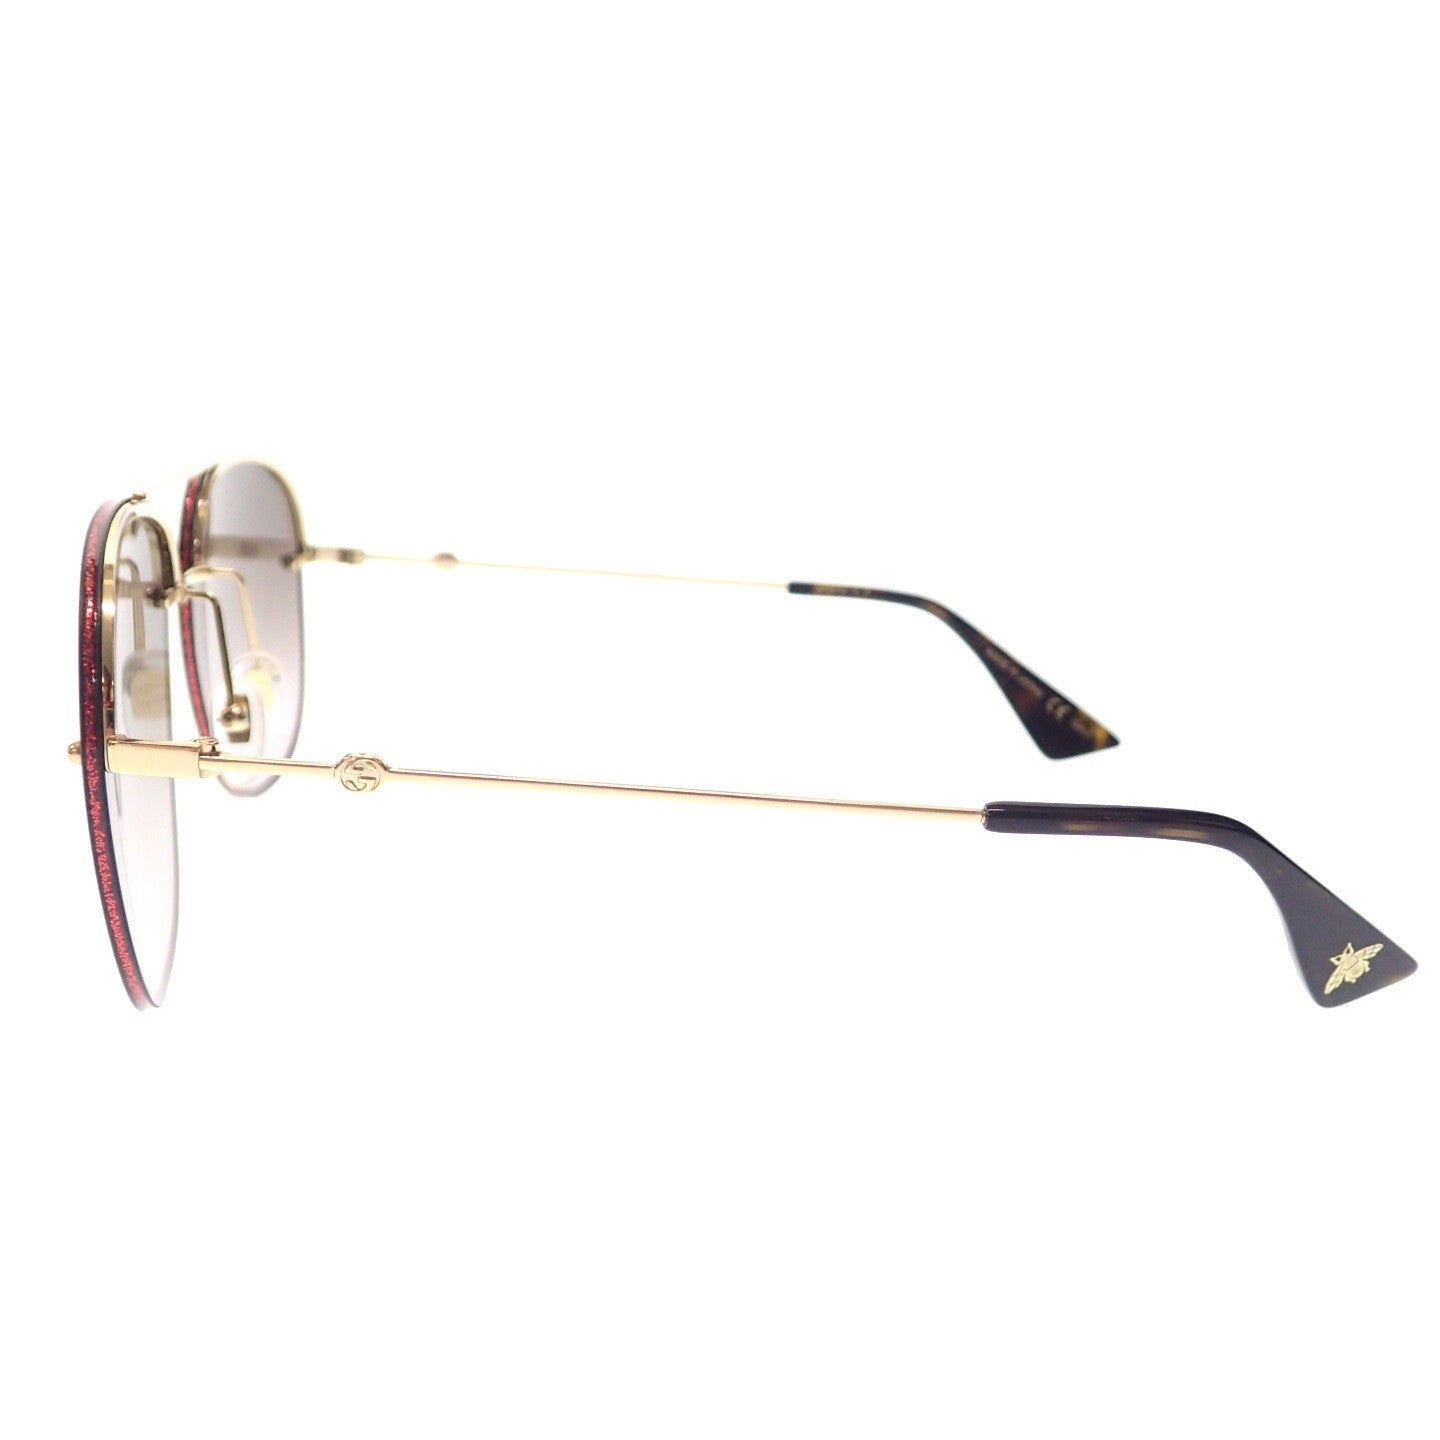 Unused ◆ Gucci Sunglasses Color Lens 62□16-145 GG0227S Gold Series with Case Ladies GUCCI [AFI10] 